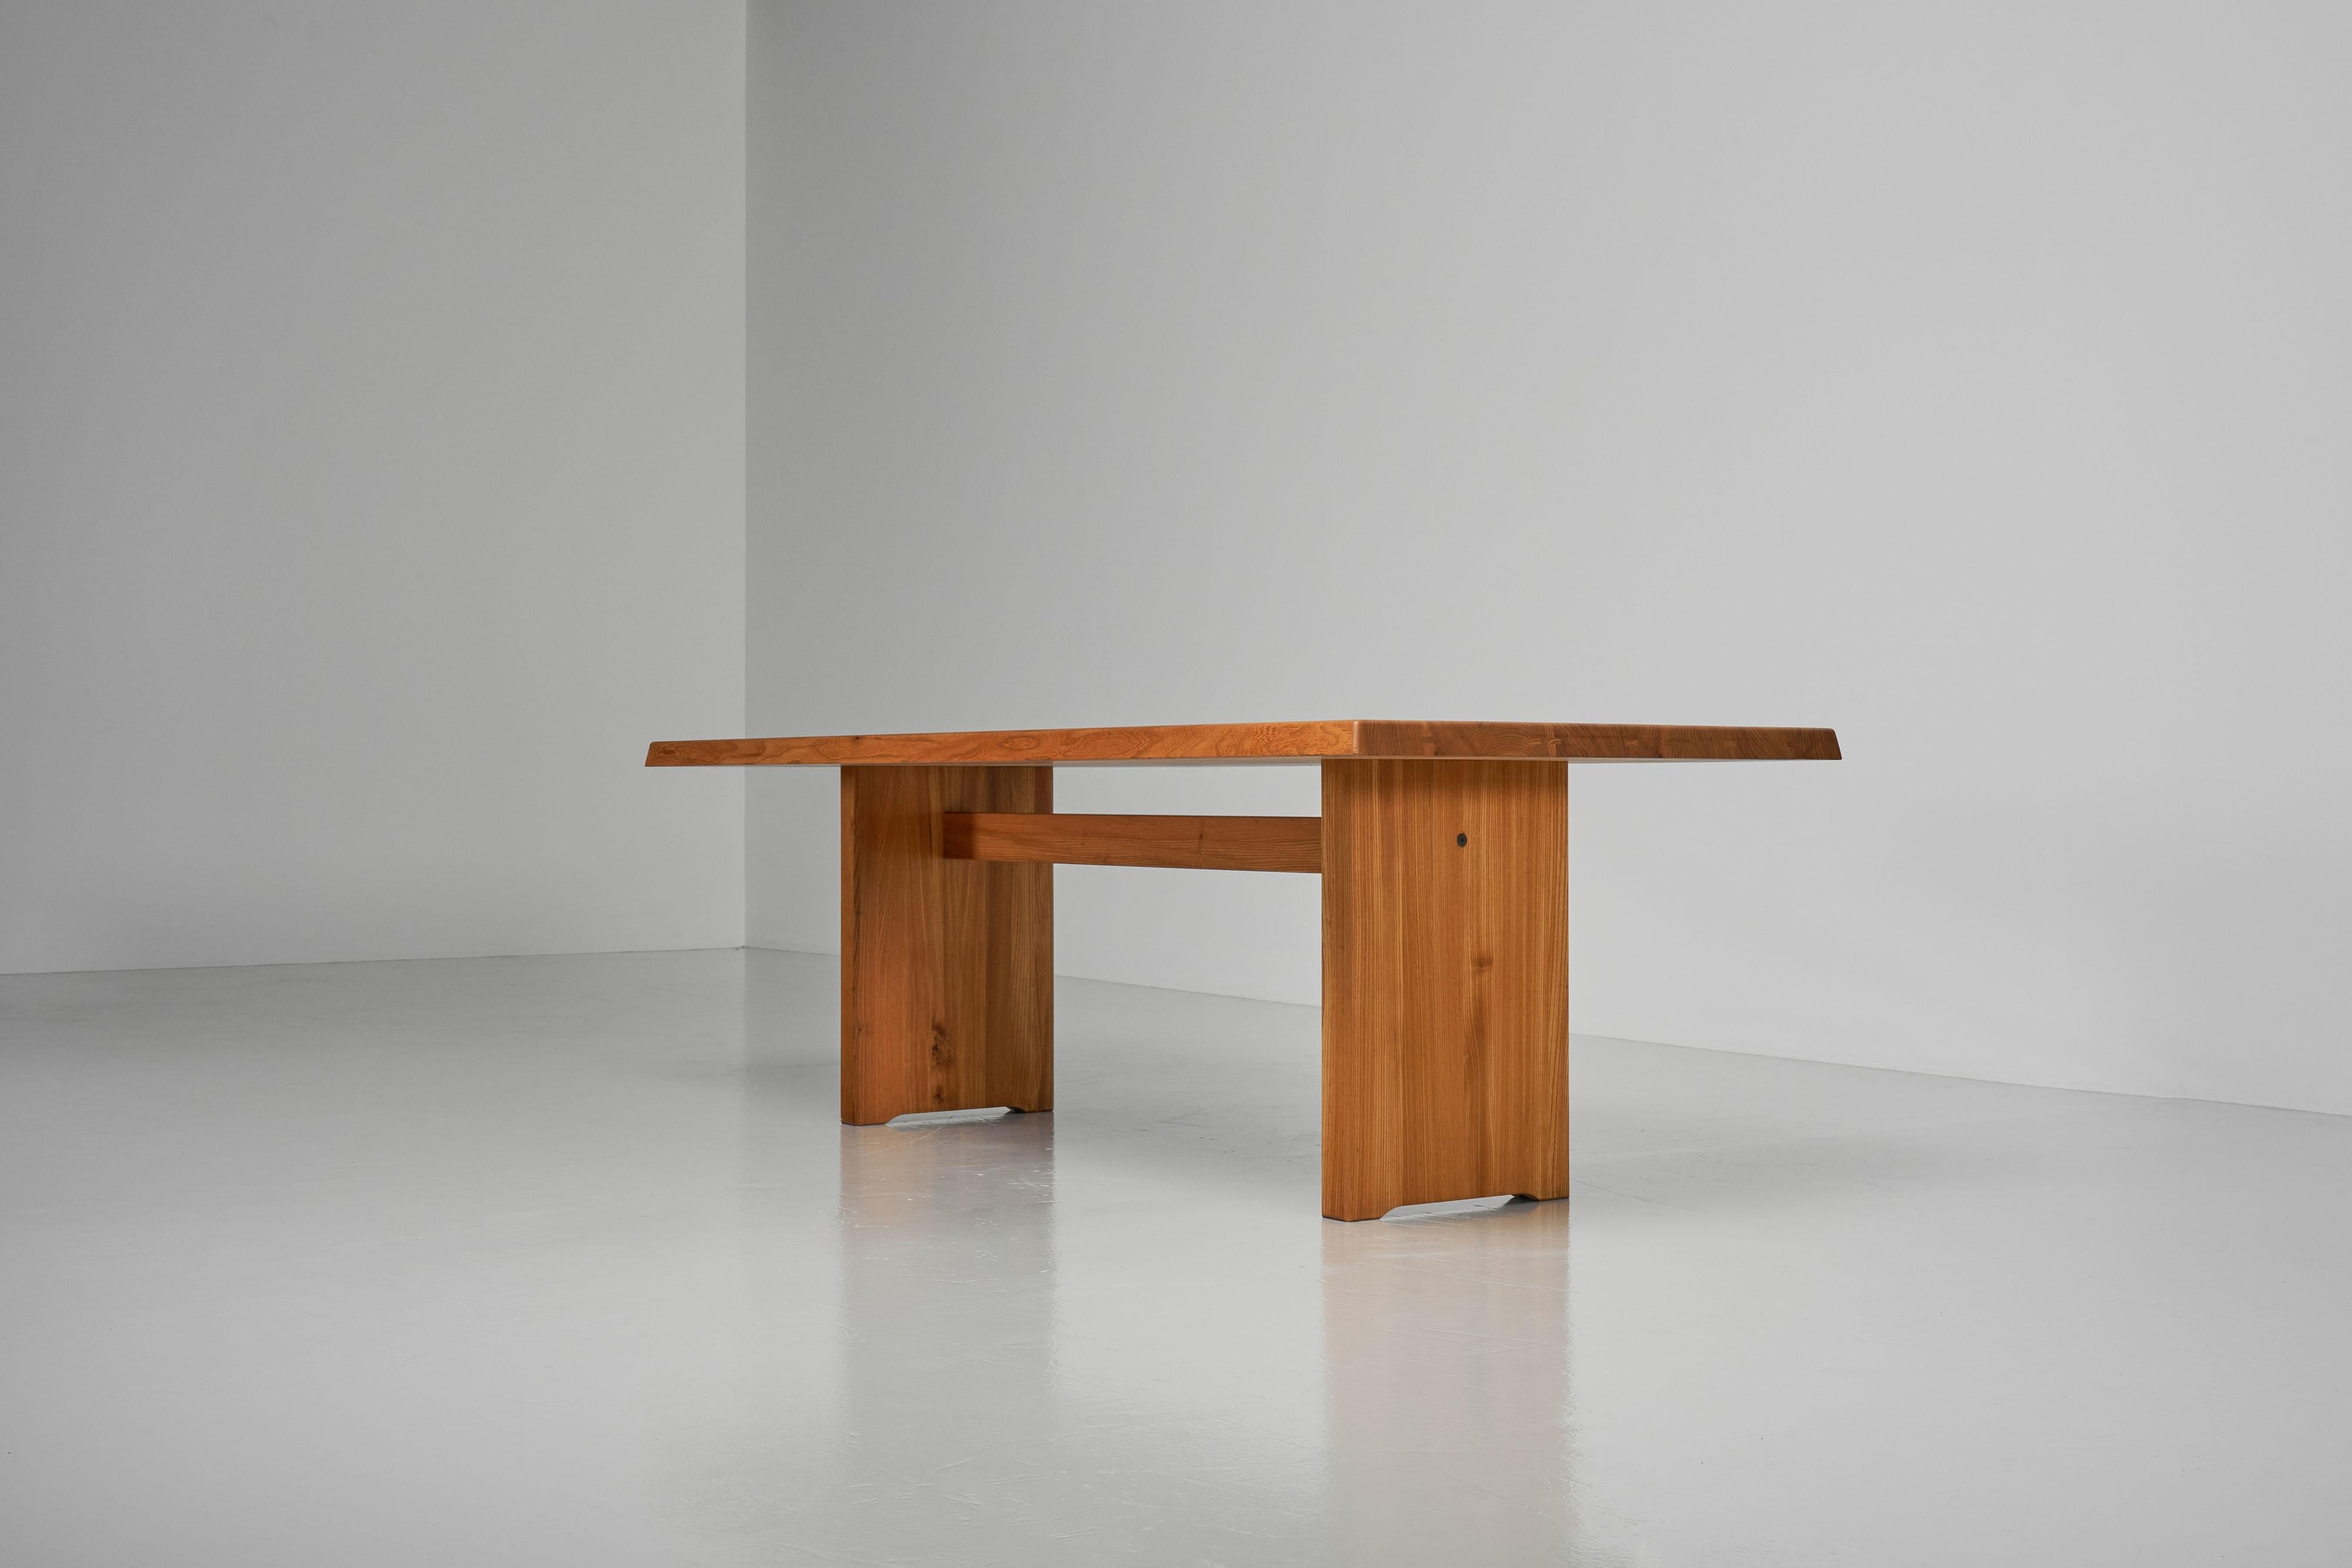 Beautiful early, super conditioned T14D dining table designed by Pierre Chapo and manufactured in his own workshop in Gordes, France 1963. This dining table is made of solid elmwood has very nicely constructed tabletop. The wood-joint connections on